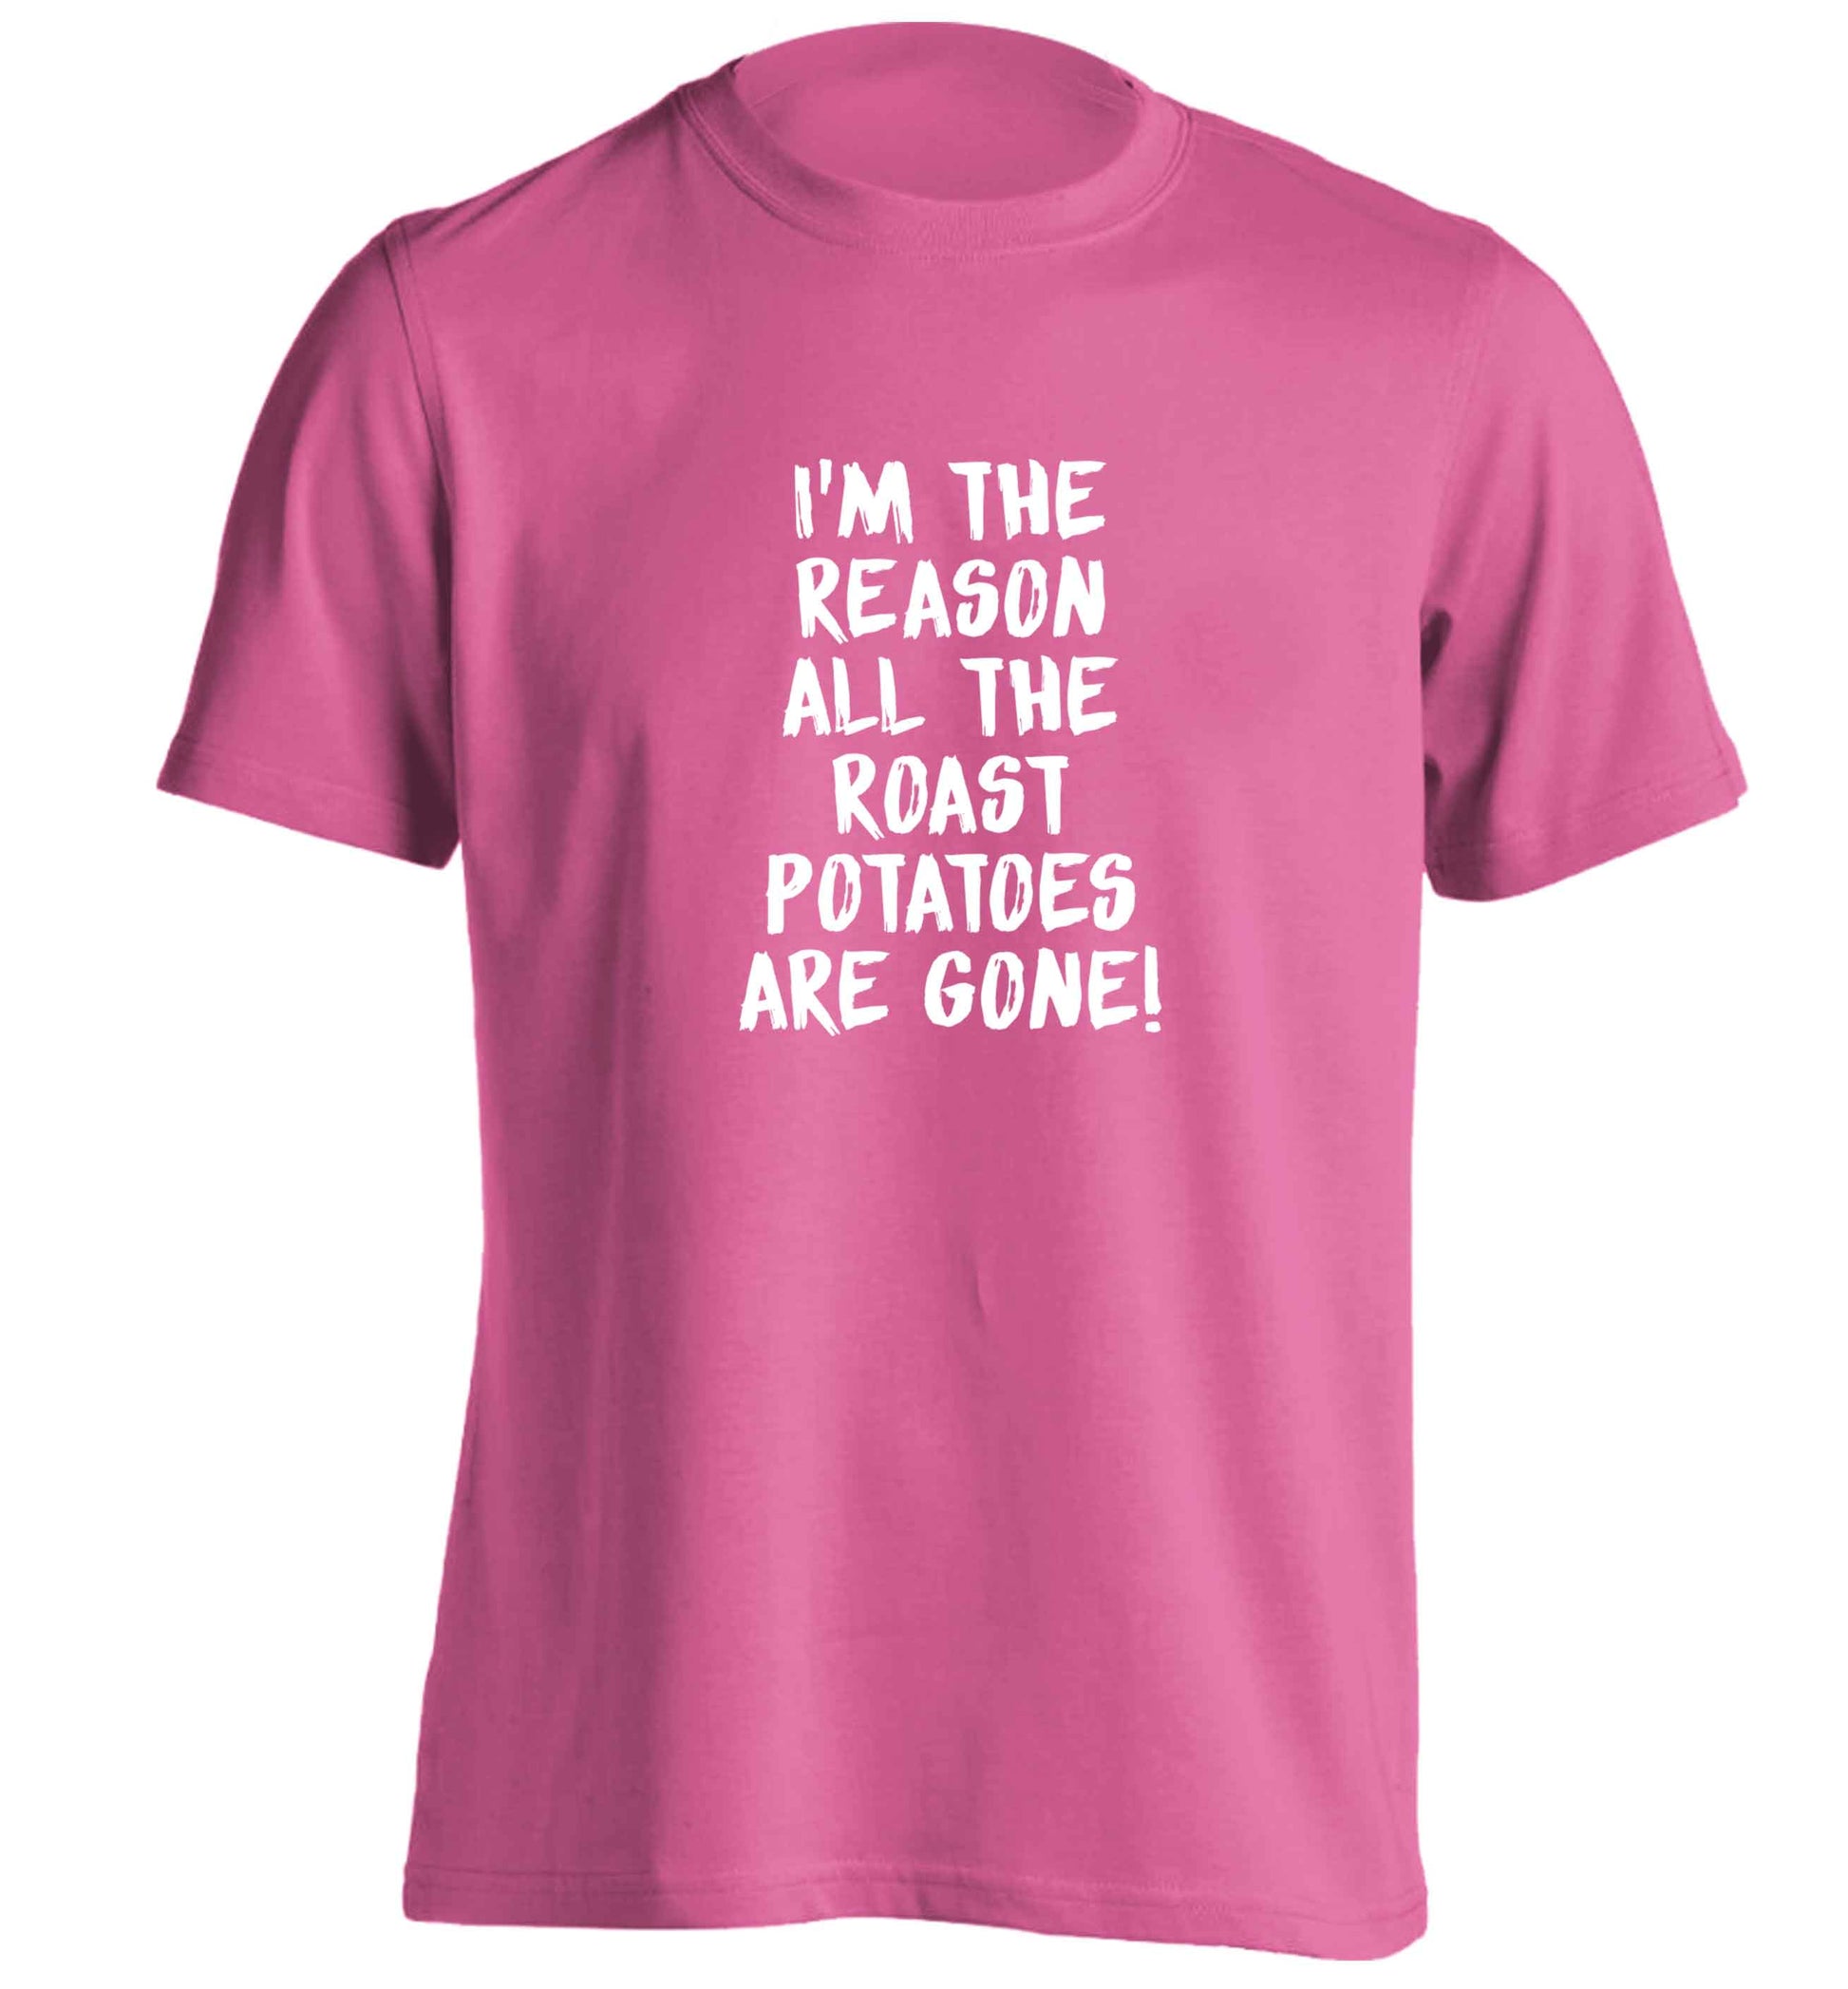 I'm the reason all the roast potatoes are gone adults unisex pink Tshirt 2XL